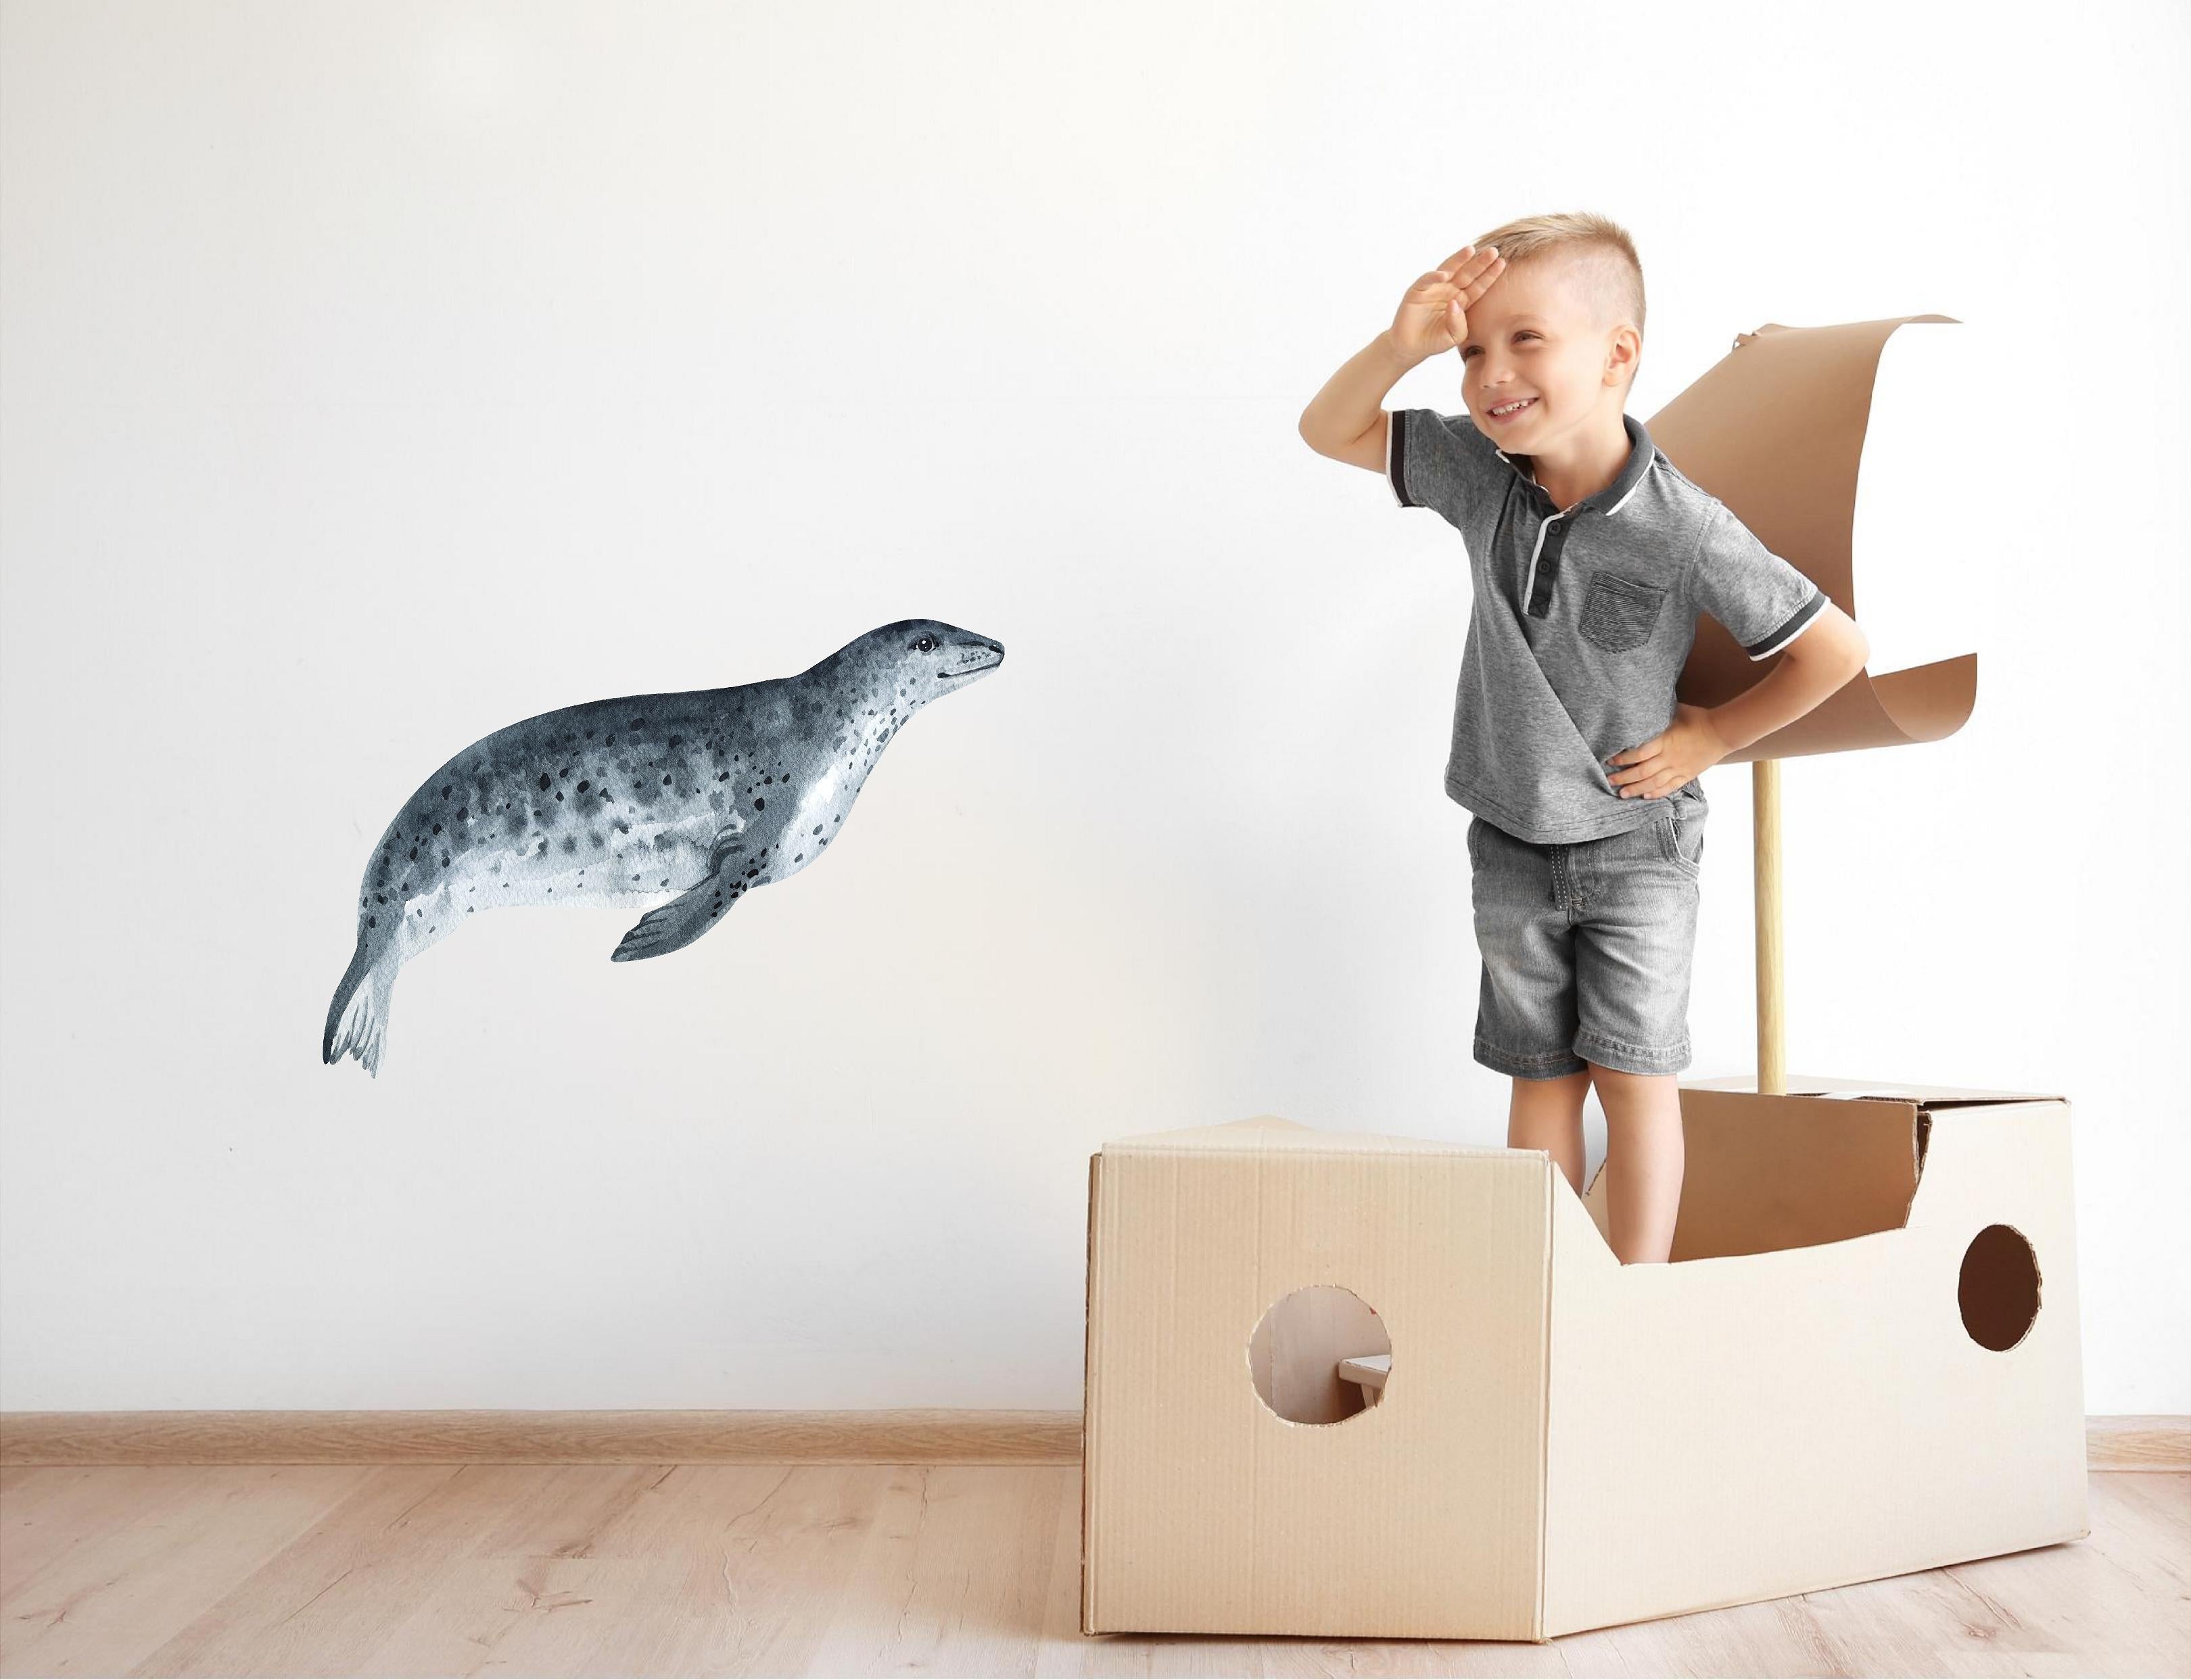 Leopard Seal Wall Decal Sea Animal Removable Fabric Wall Sticker | DecalBaby